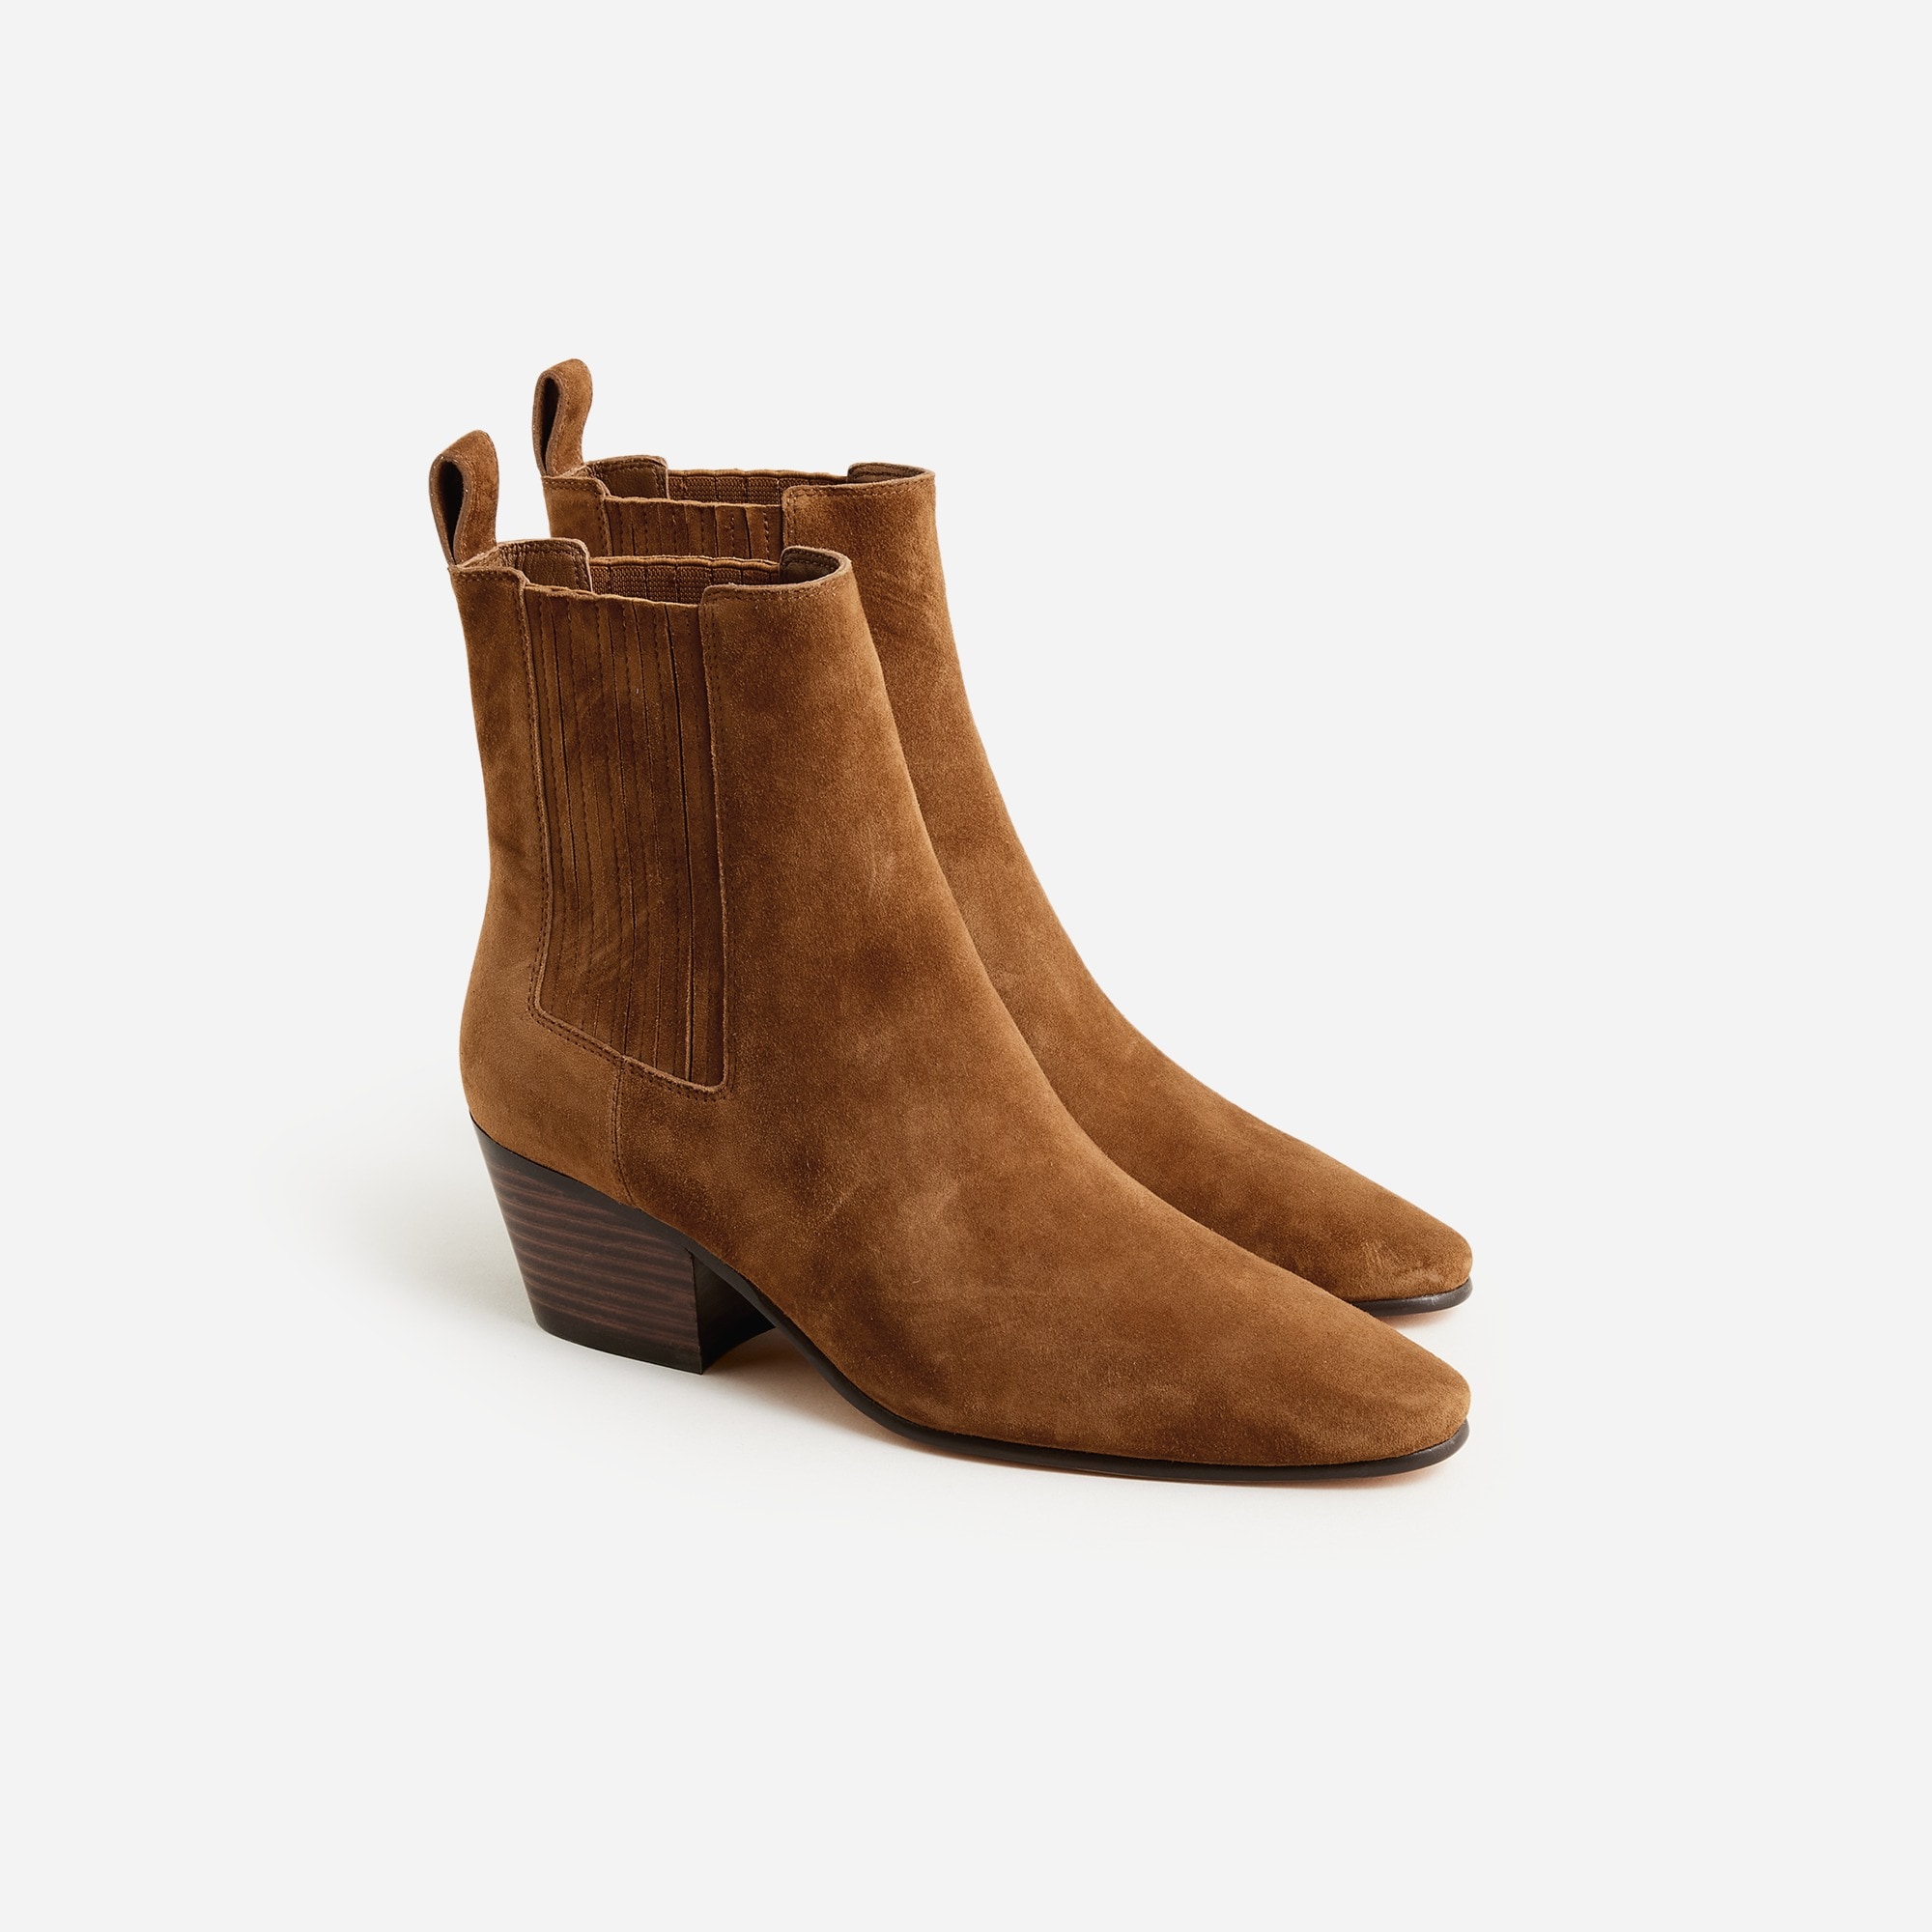  Piper ankle boots in suede